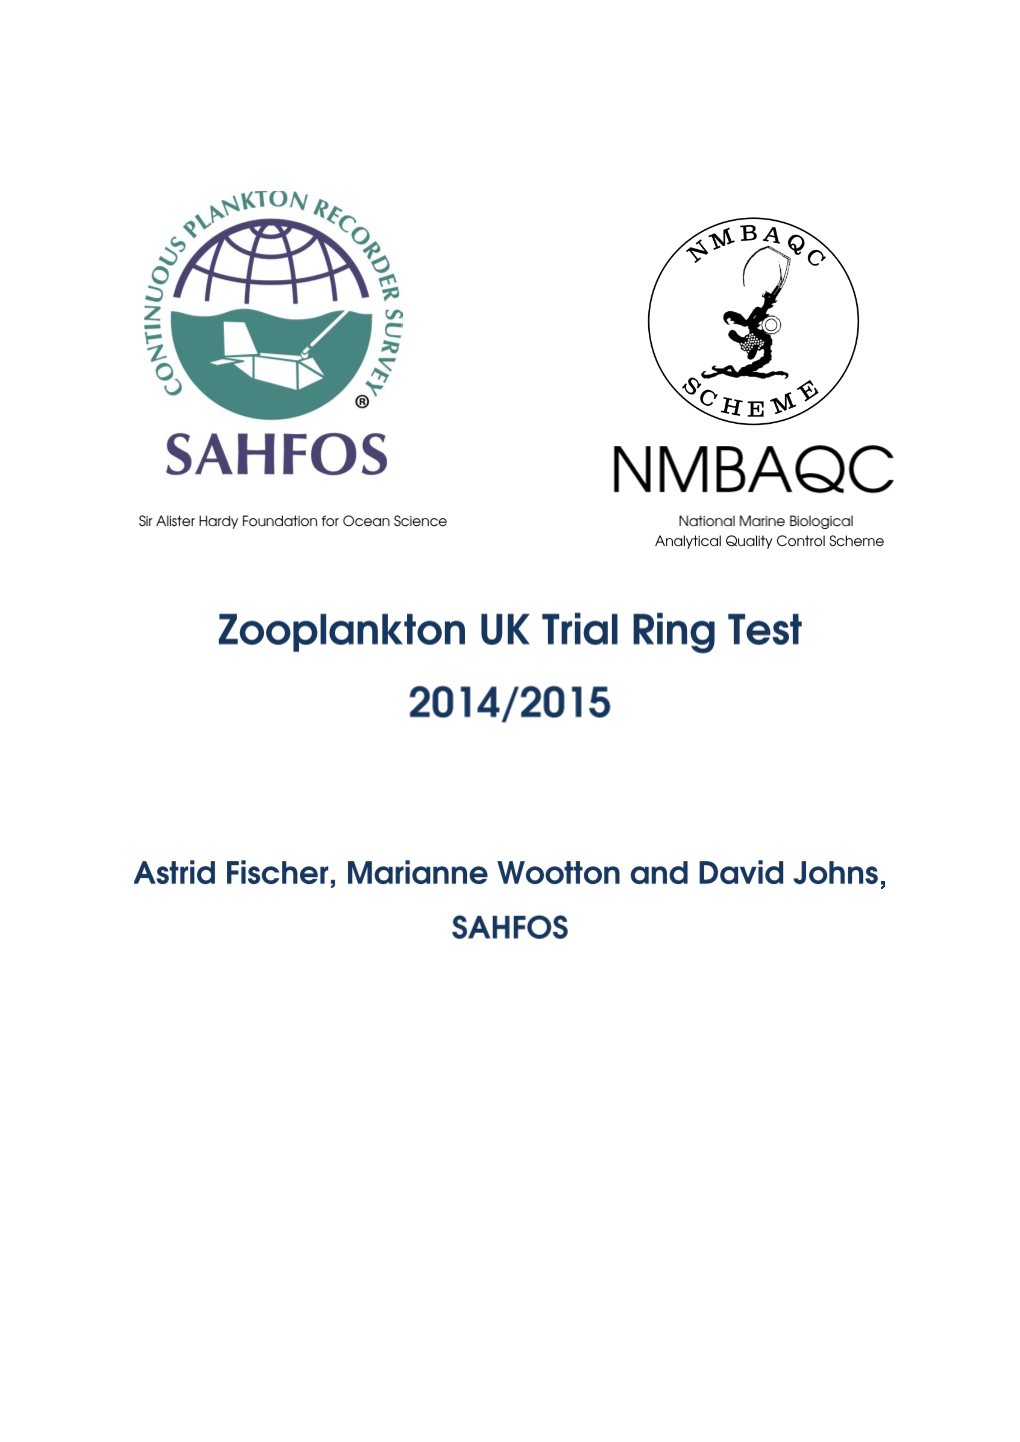 Final Report of the UK Trial Ring Test